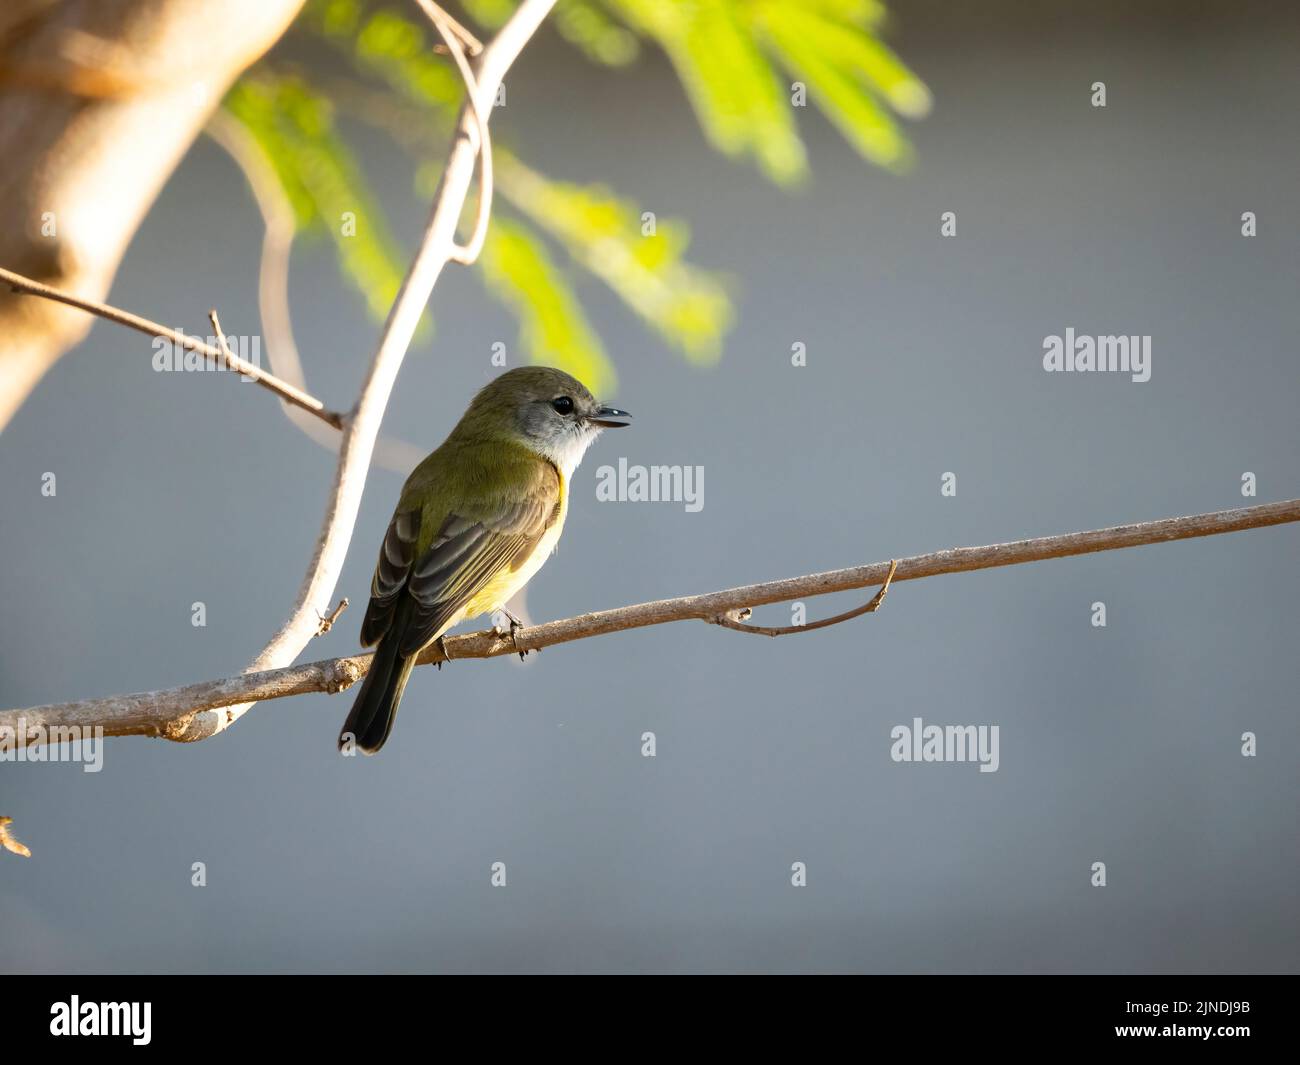 A closeup shot of Lemon Bellied Flycatcher or Microeca flavigaster perched on a branch Stock Photo